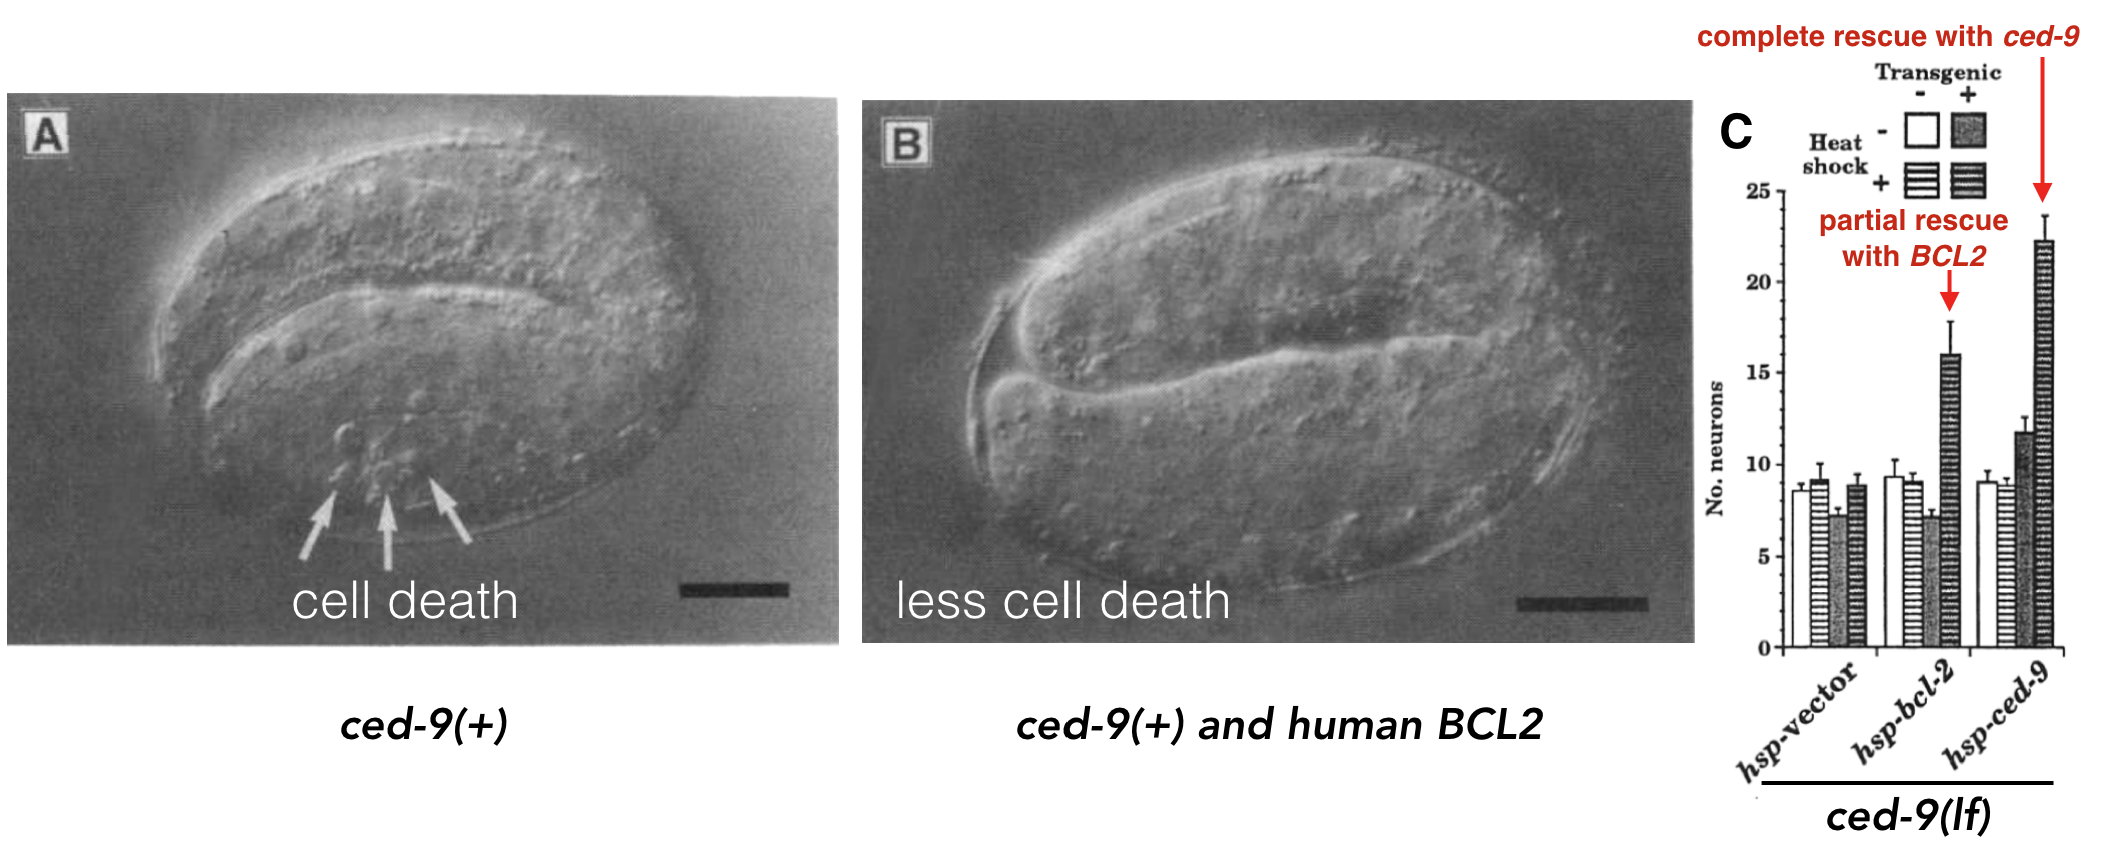 A) Normal worm development includes a certain amount of programmed cell death. B) When human *BCL2* is expressed in worm embryos, less cell death is observed (Vaux et al. 1992). *+* indicates, wildtype allele. C) Data demonstrating that human *BCL2* is able to partially rescue the *ced-9* loss-of-function mutant phenotype (Hengartner and Horvitz, 1994). 